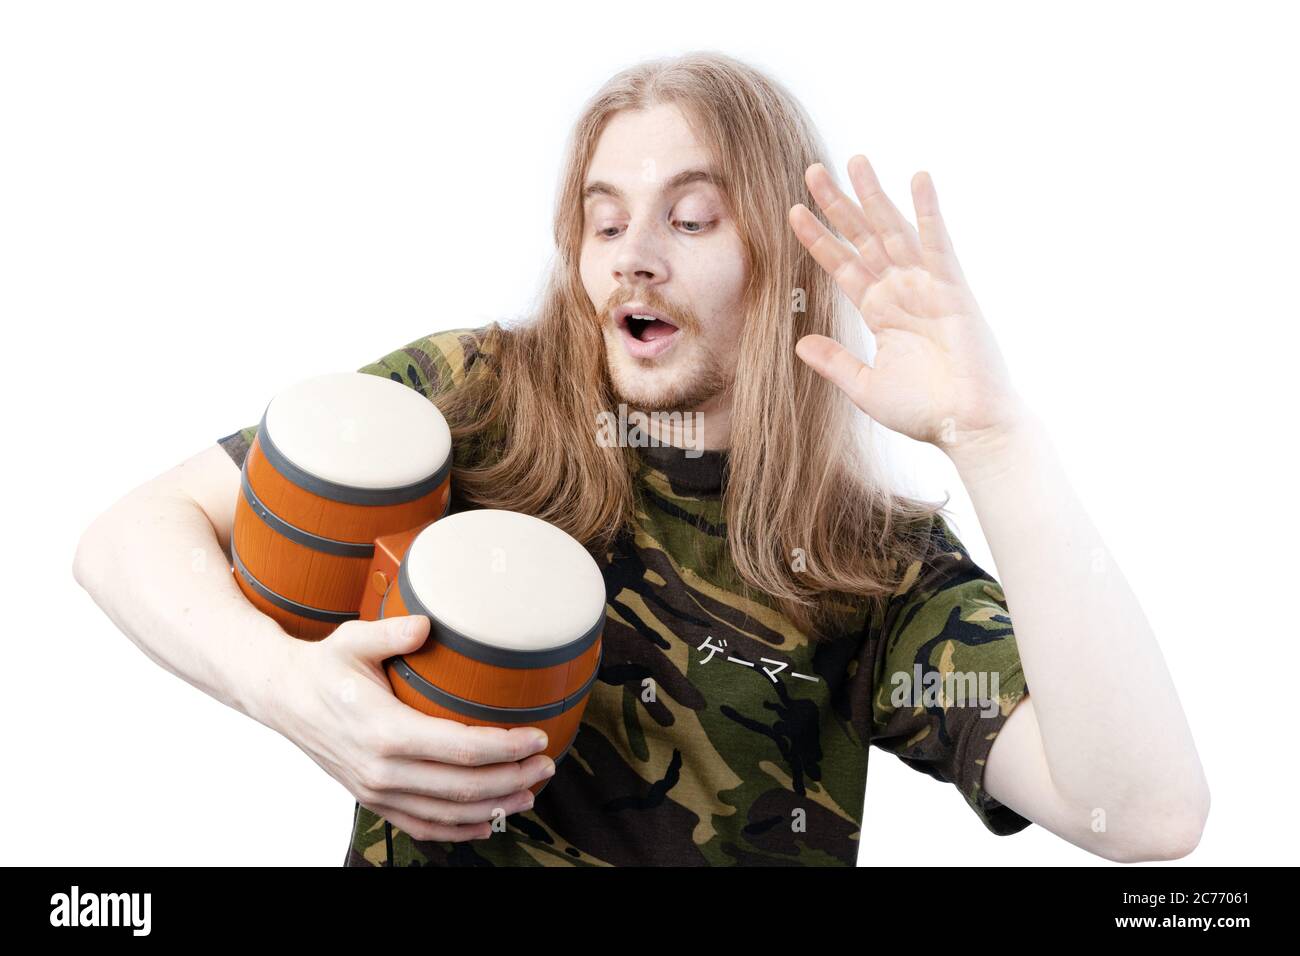 Long Haired Gamer Playing Video Game Drums Controller Stock Photo